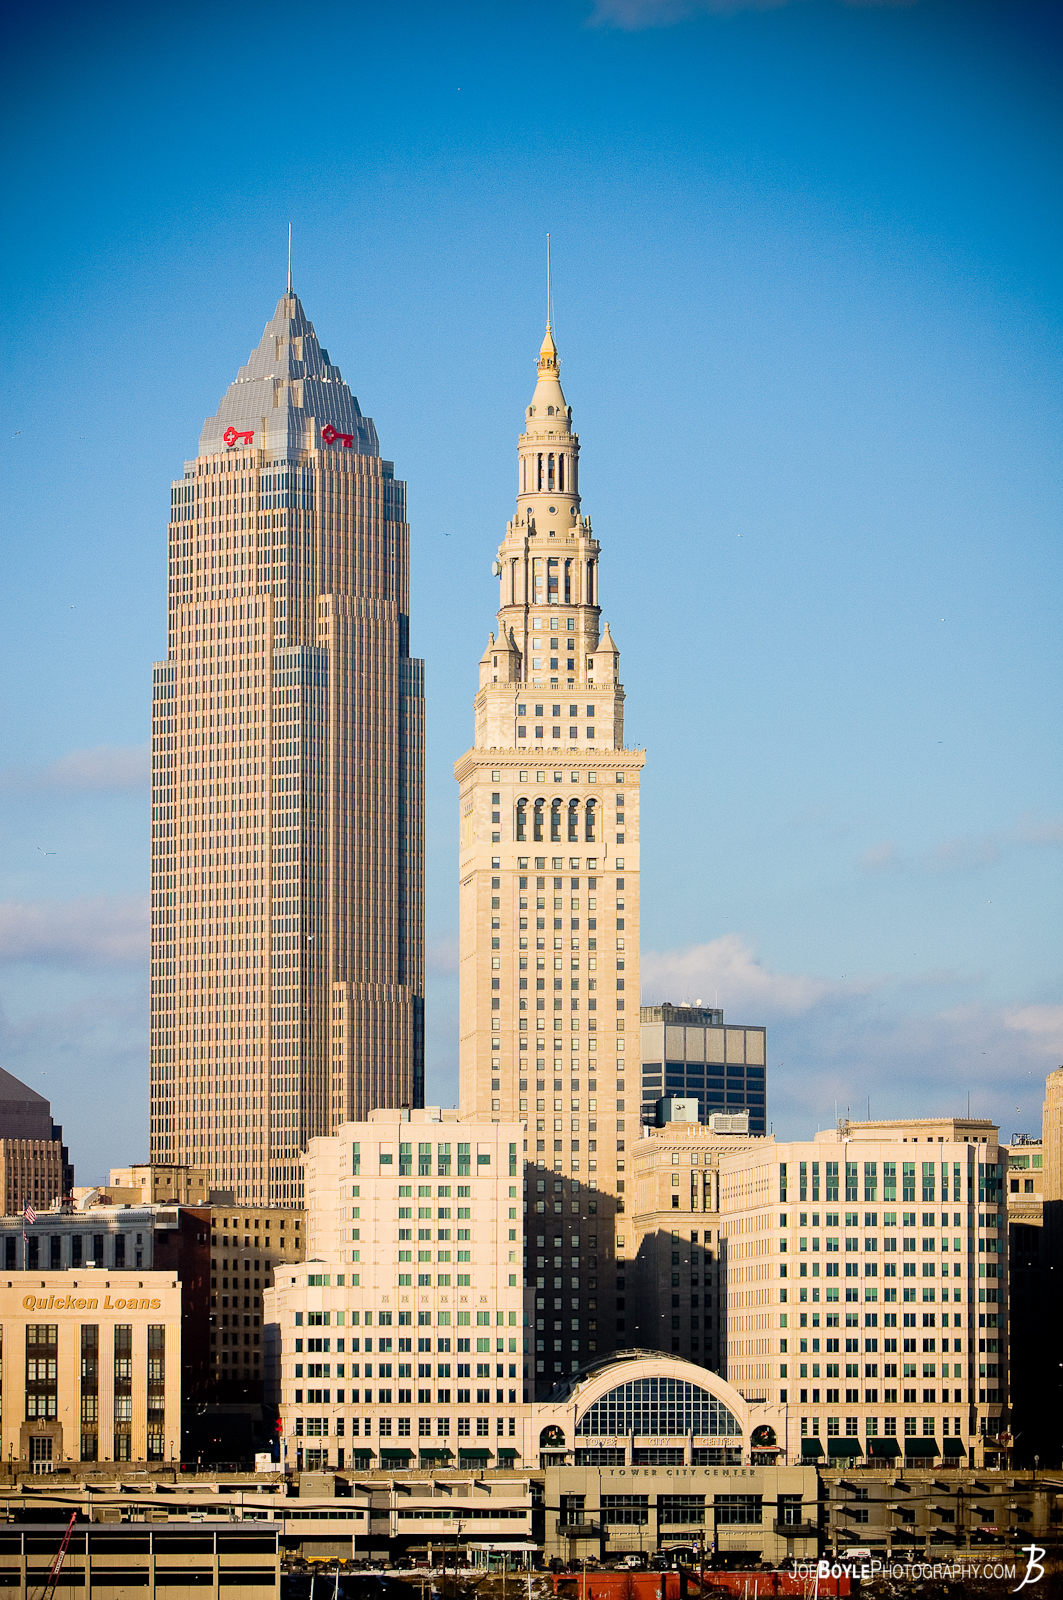  I took this image from the Hope Memorial Bridge. Featured here is the Terminal Tower and Key Tower. 